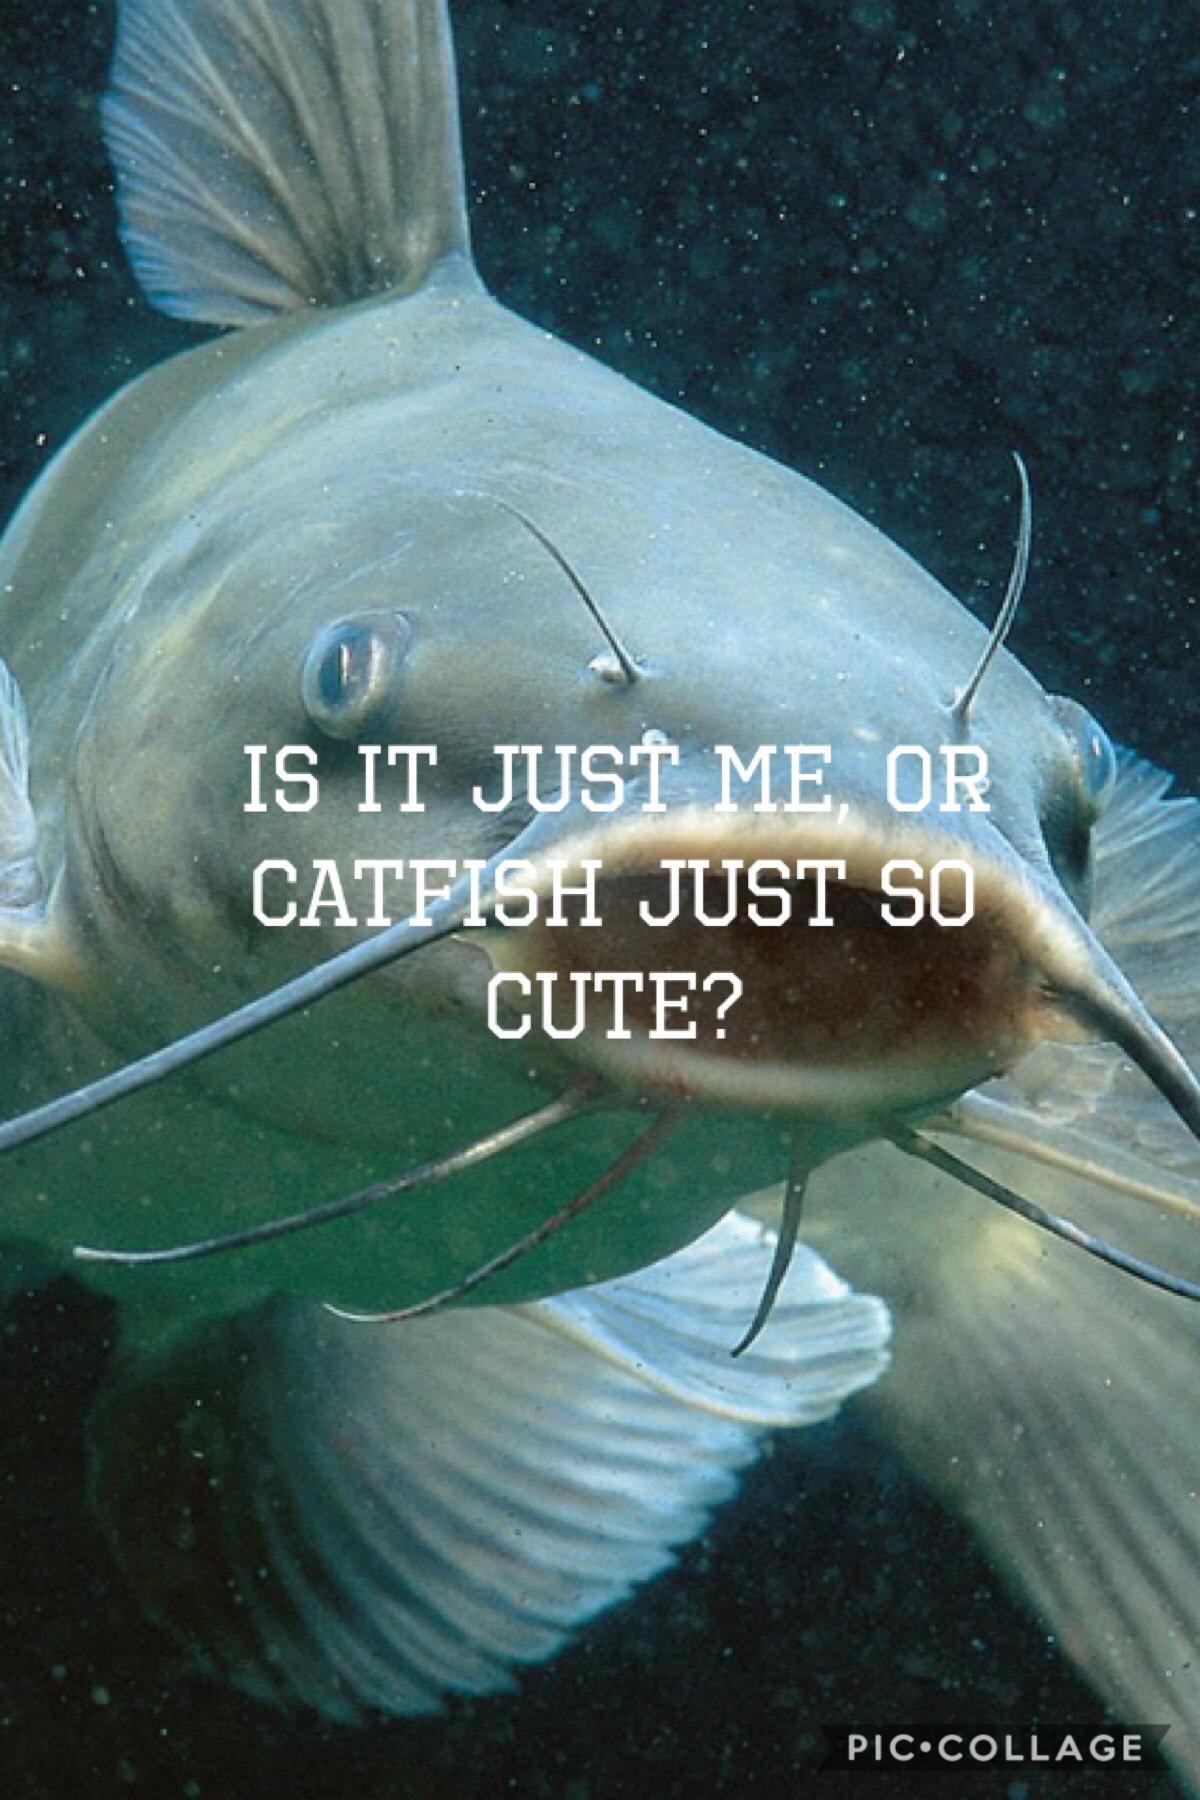 Catfish are just so derpy 